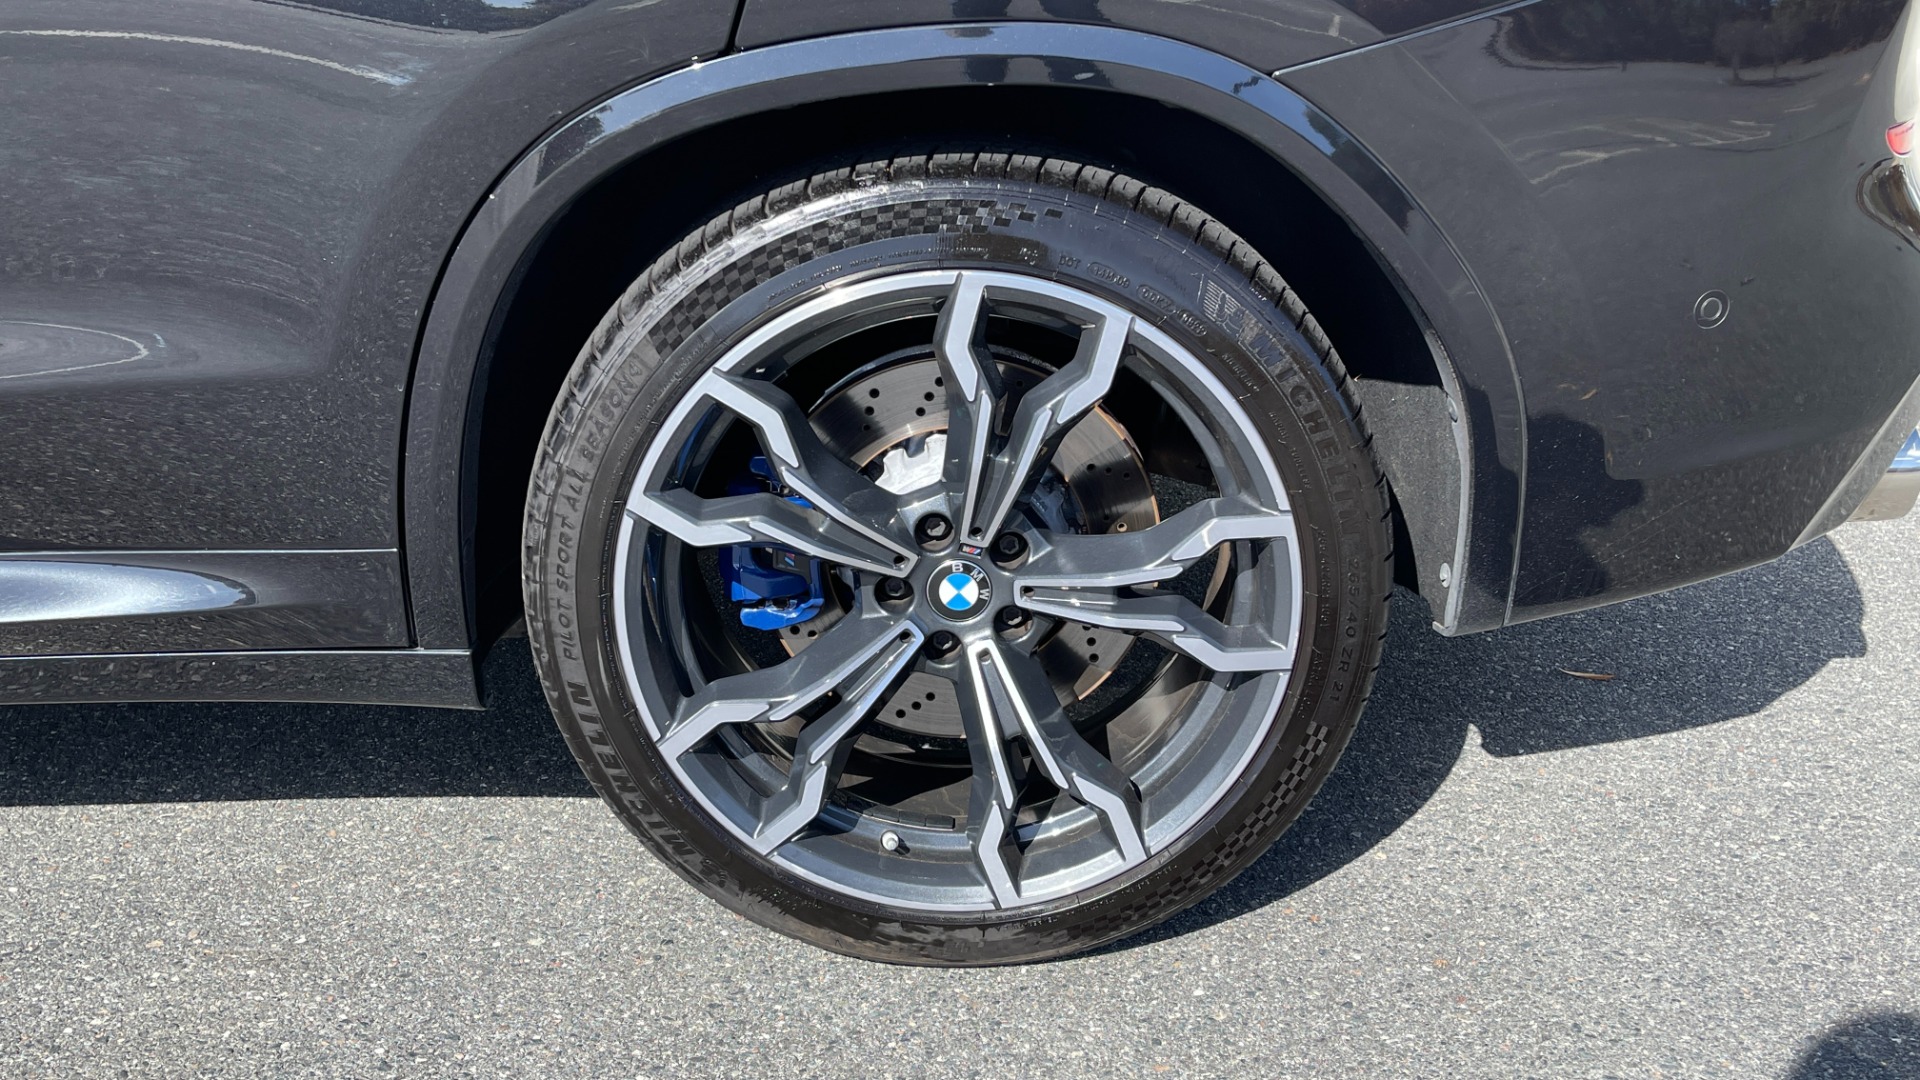 Used 2020 BMW X3 M MERINO LEATHER / EXECUTIVE PACKAGE / DINAN EXHAUST for sale $58,999 at Formula Imports in Charlotte NC 28227 45